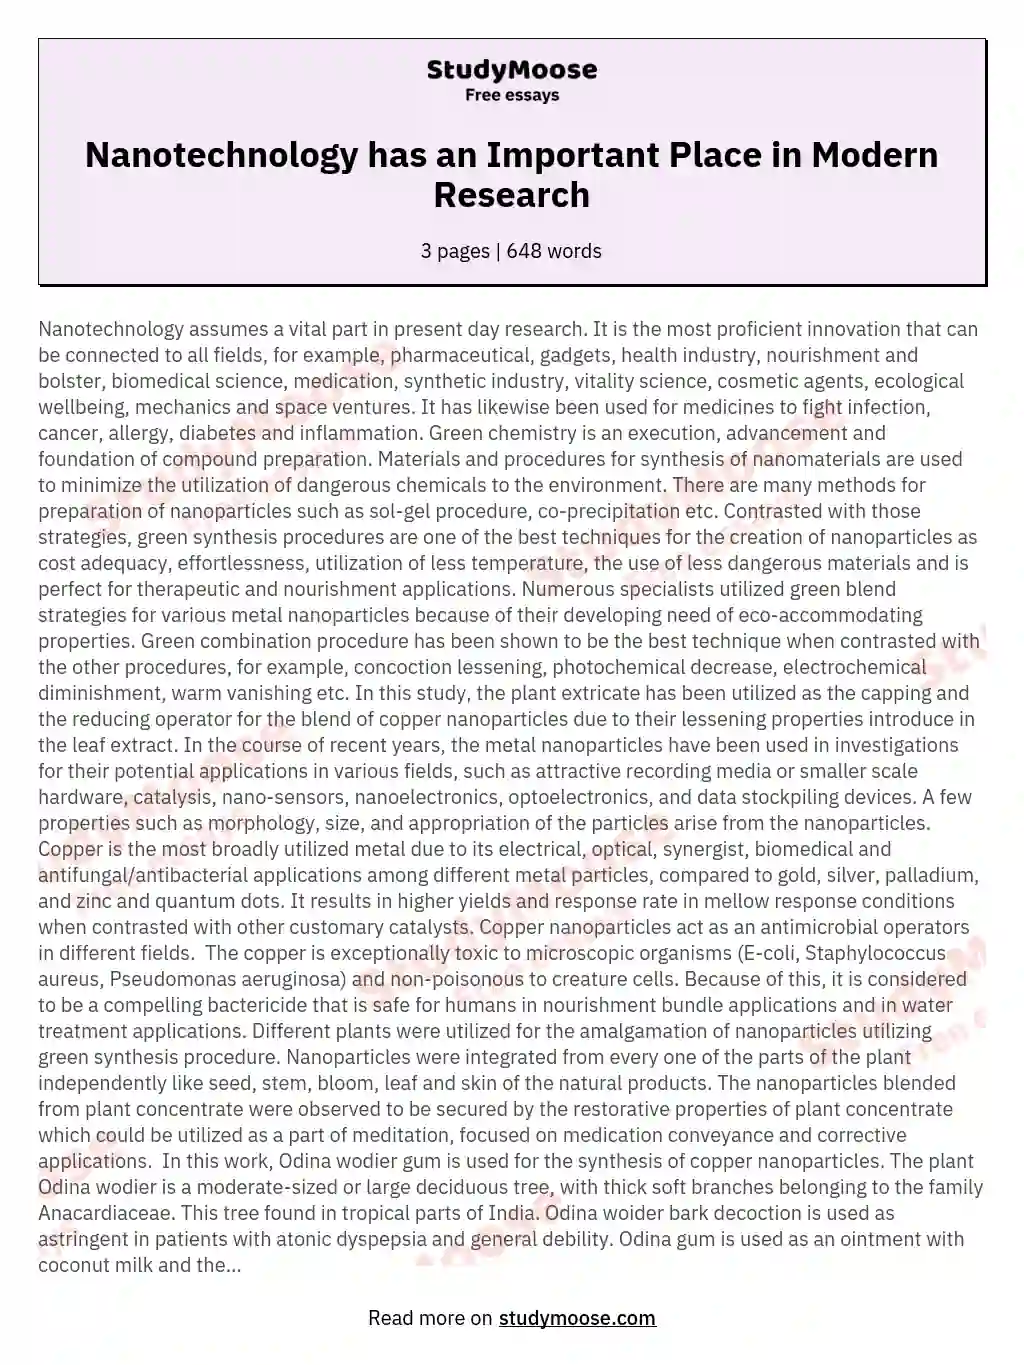 Nanotechnology has an Important Place in Modern Research essay